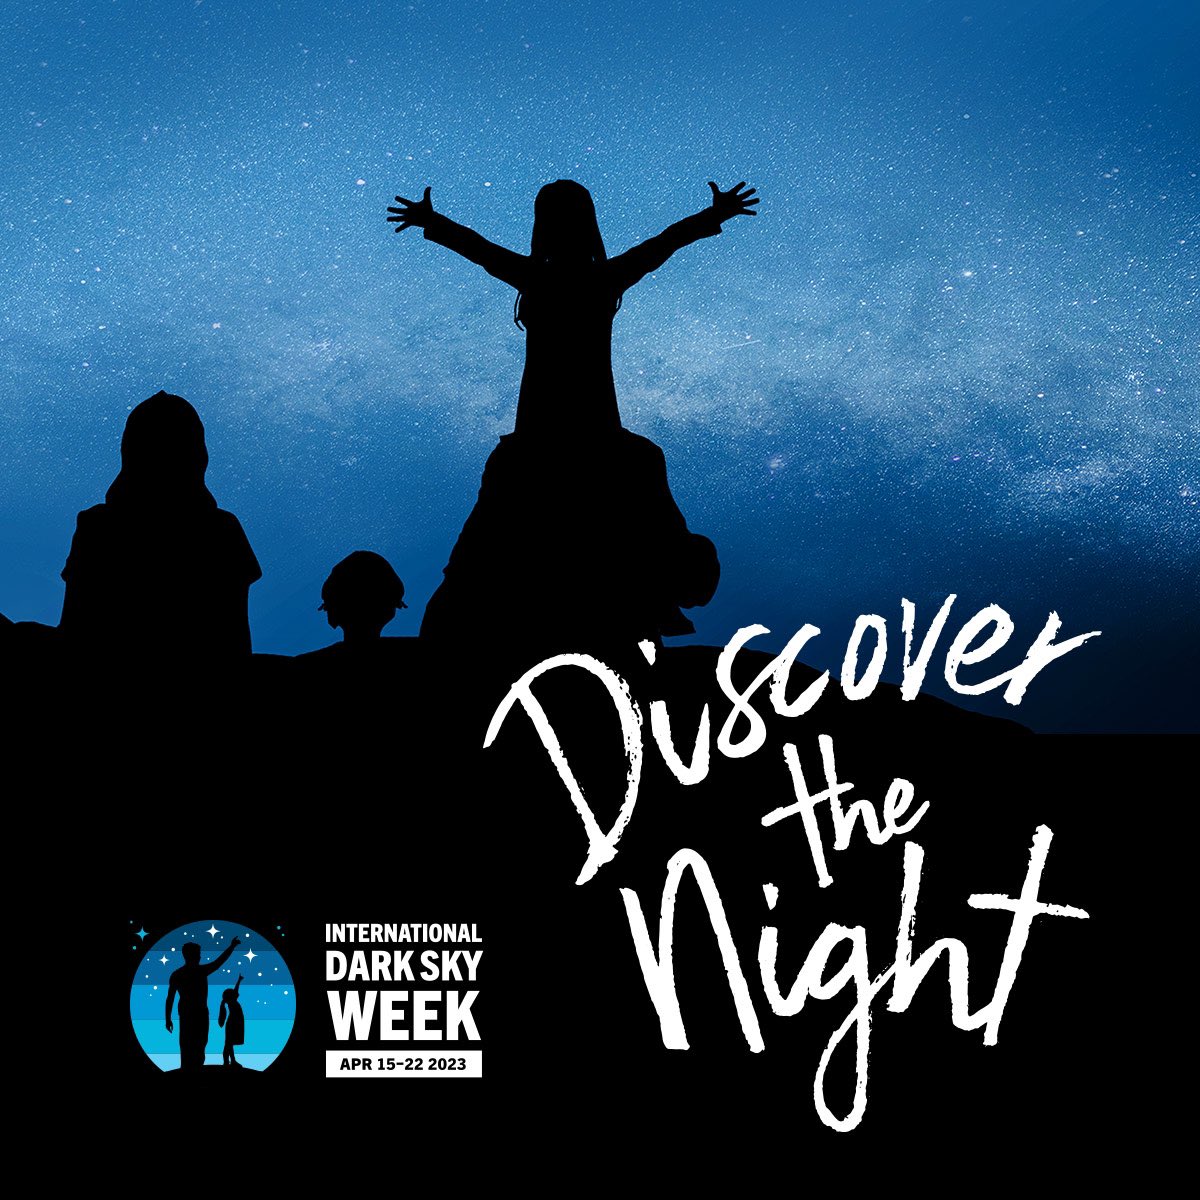 It is almost here. #discoverthenight with #InternationalDarkSkyWeek, this coming April 15th to April 22nd. #IDSW2023